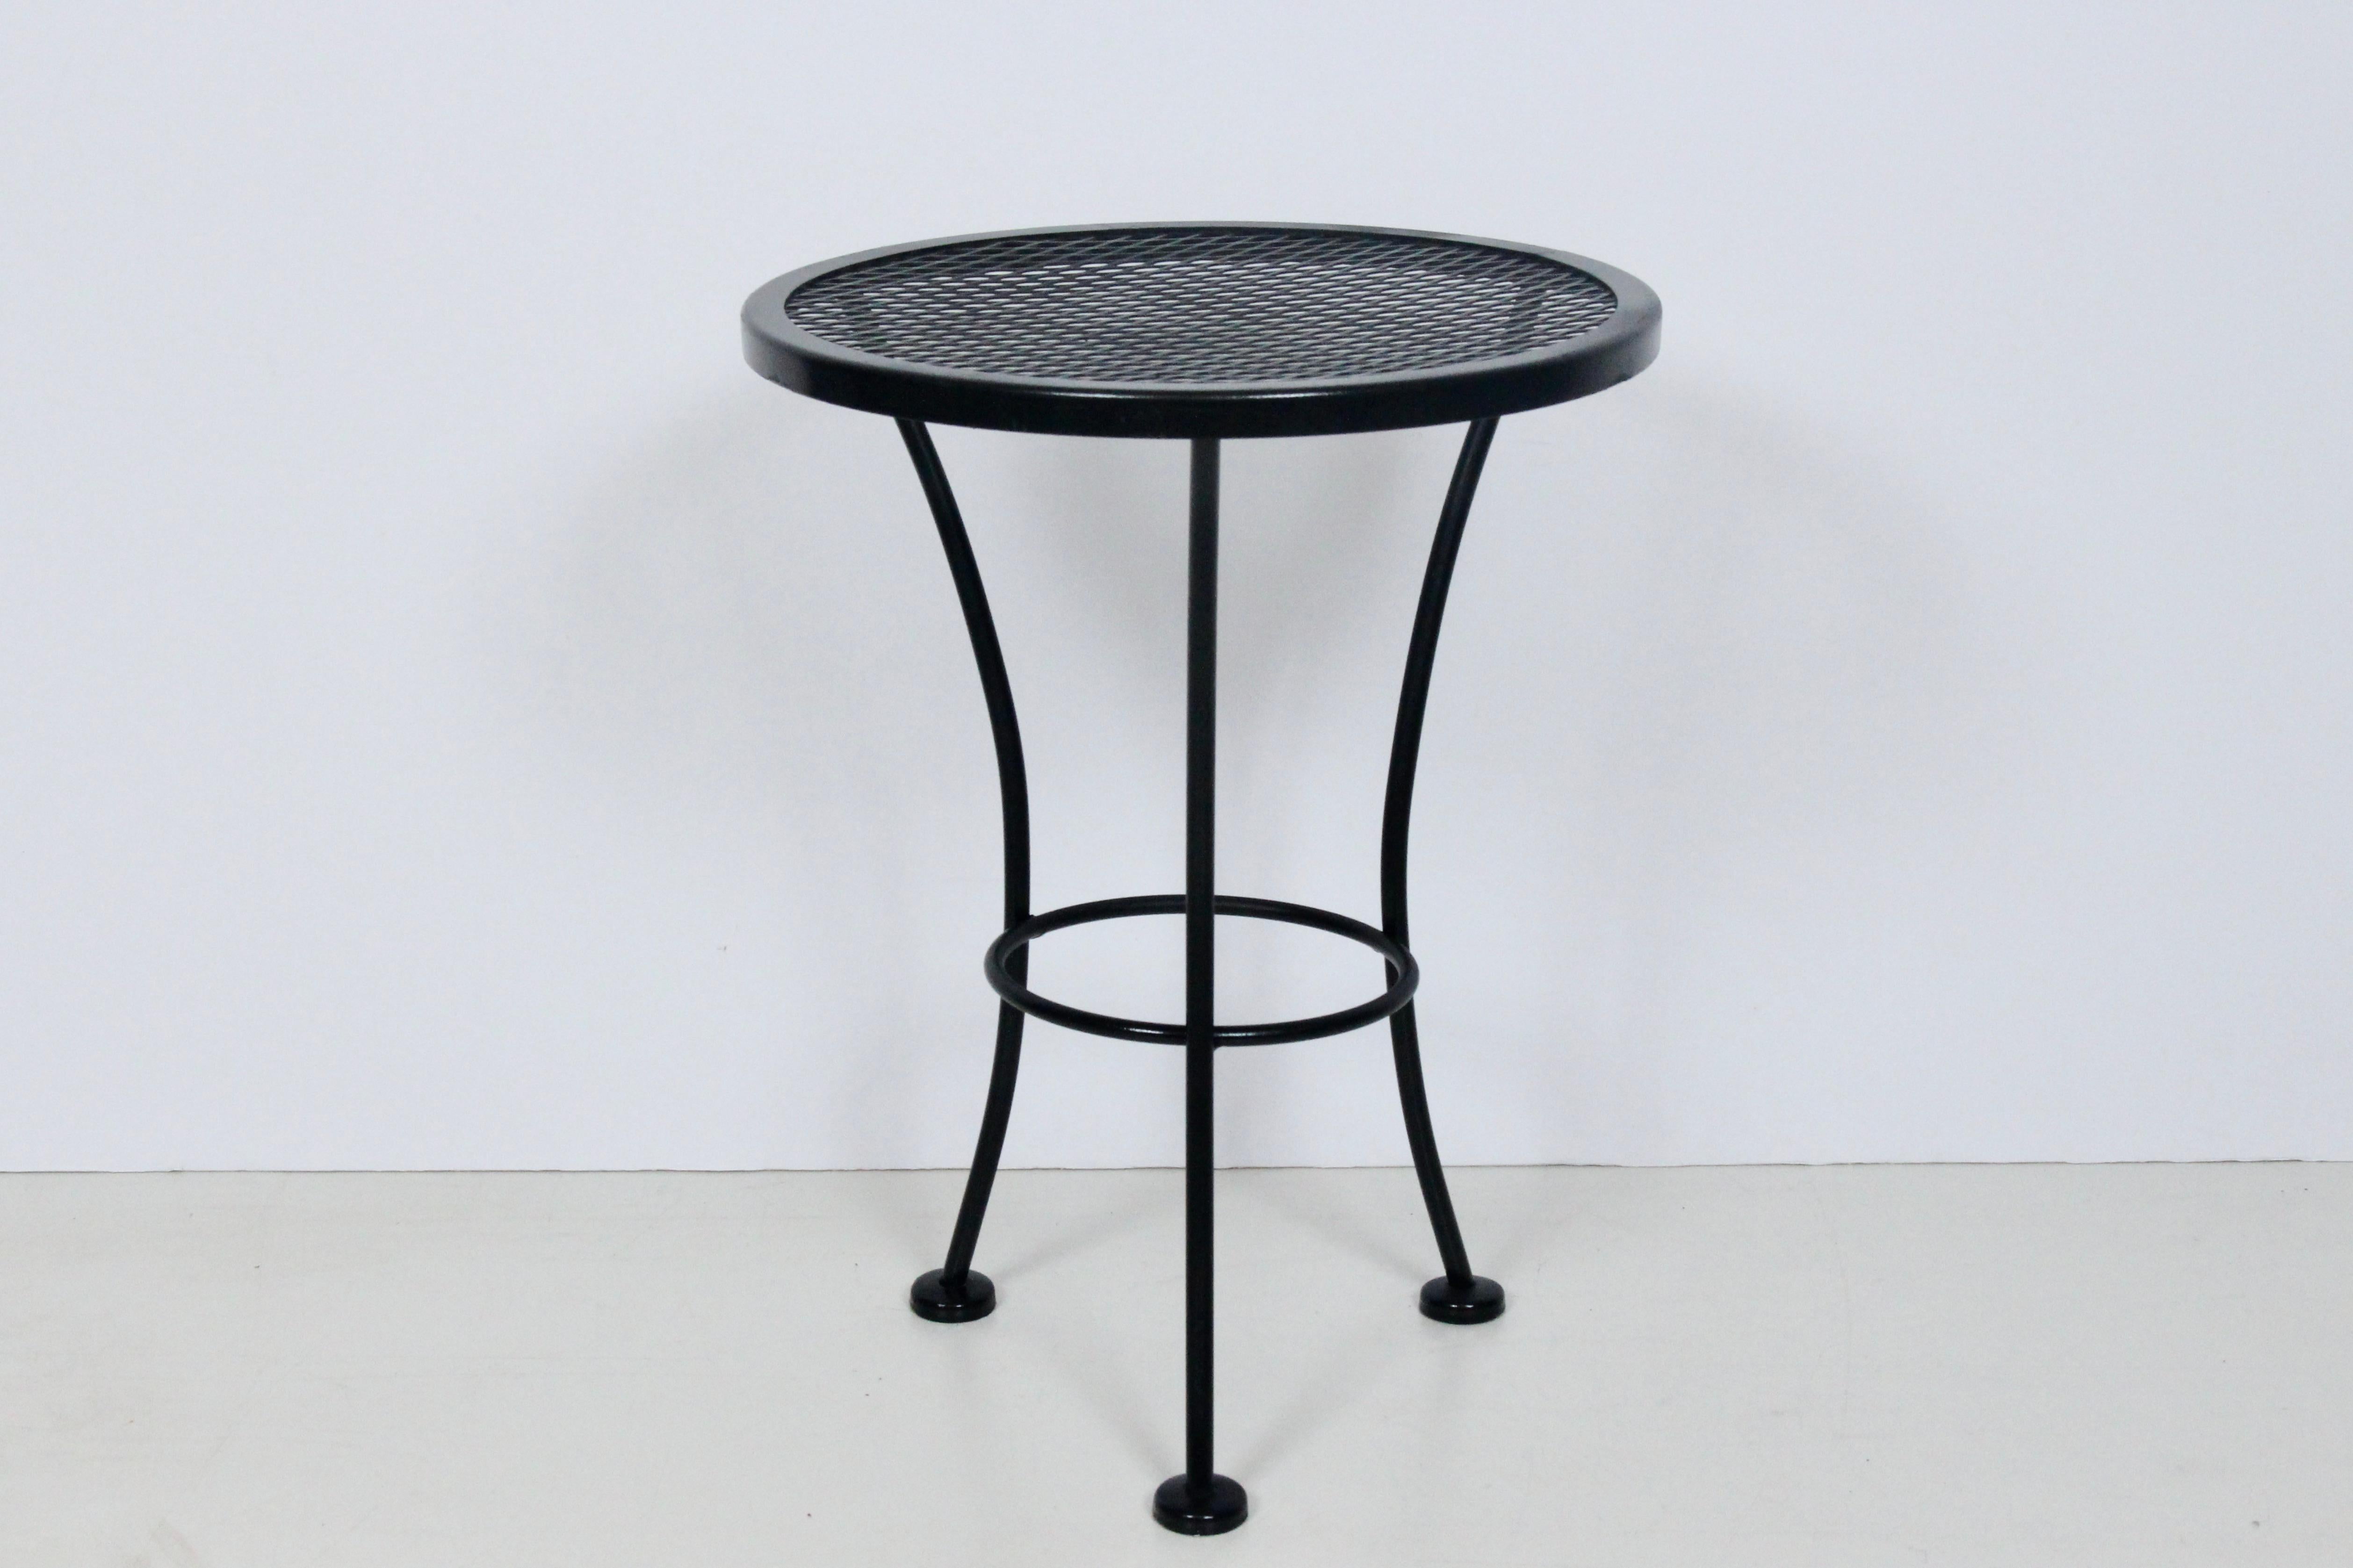 Original Russell Woodard Black Wrought Iron and Wire Mesh Occasional Table.
Featuring a Black Gloss enameled three legged reinforced framework with sturdy circular, wire Mesh surface and capped feet.  Indoor / Outdoor. Versatile. 1950's. Classic.